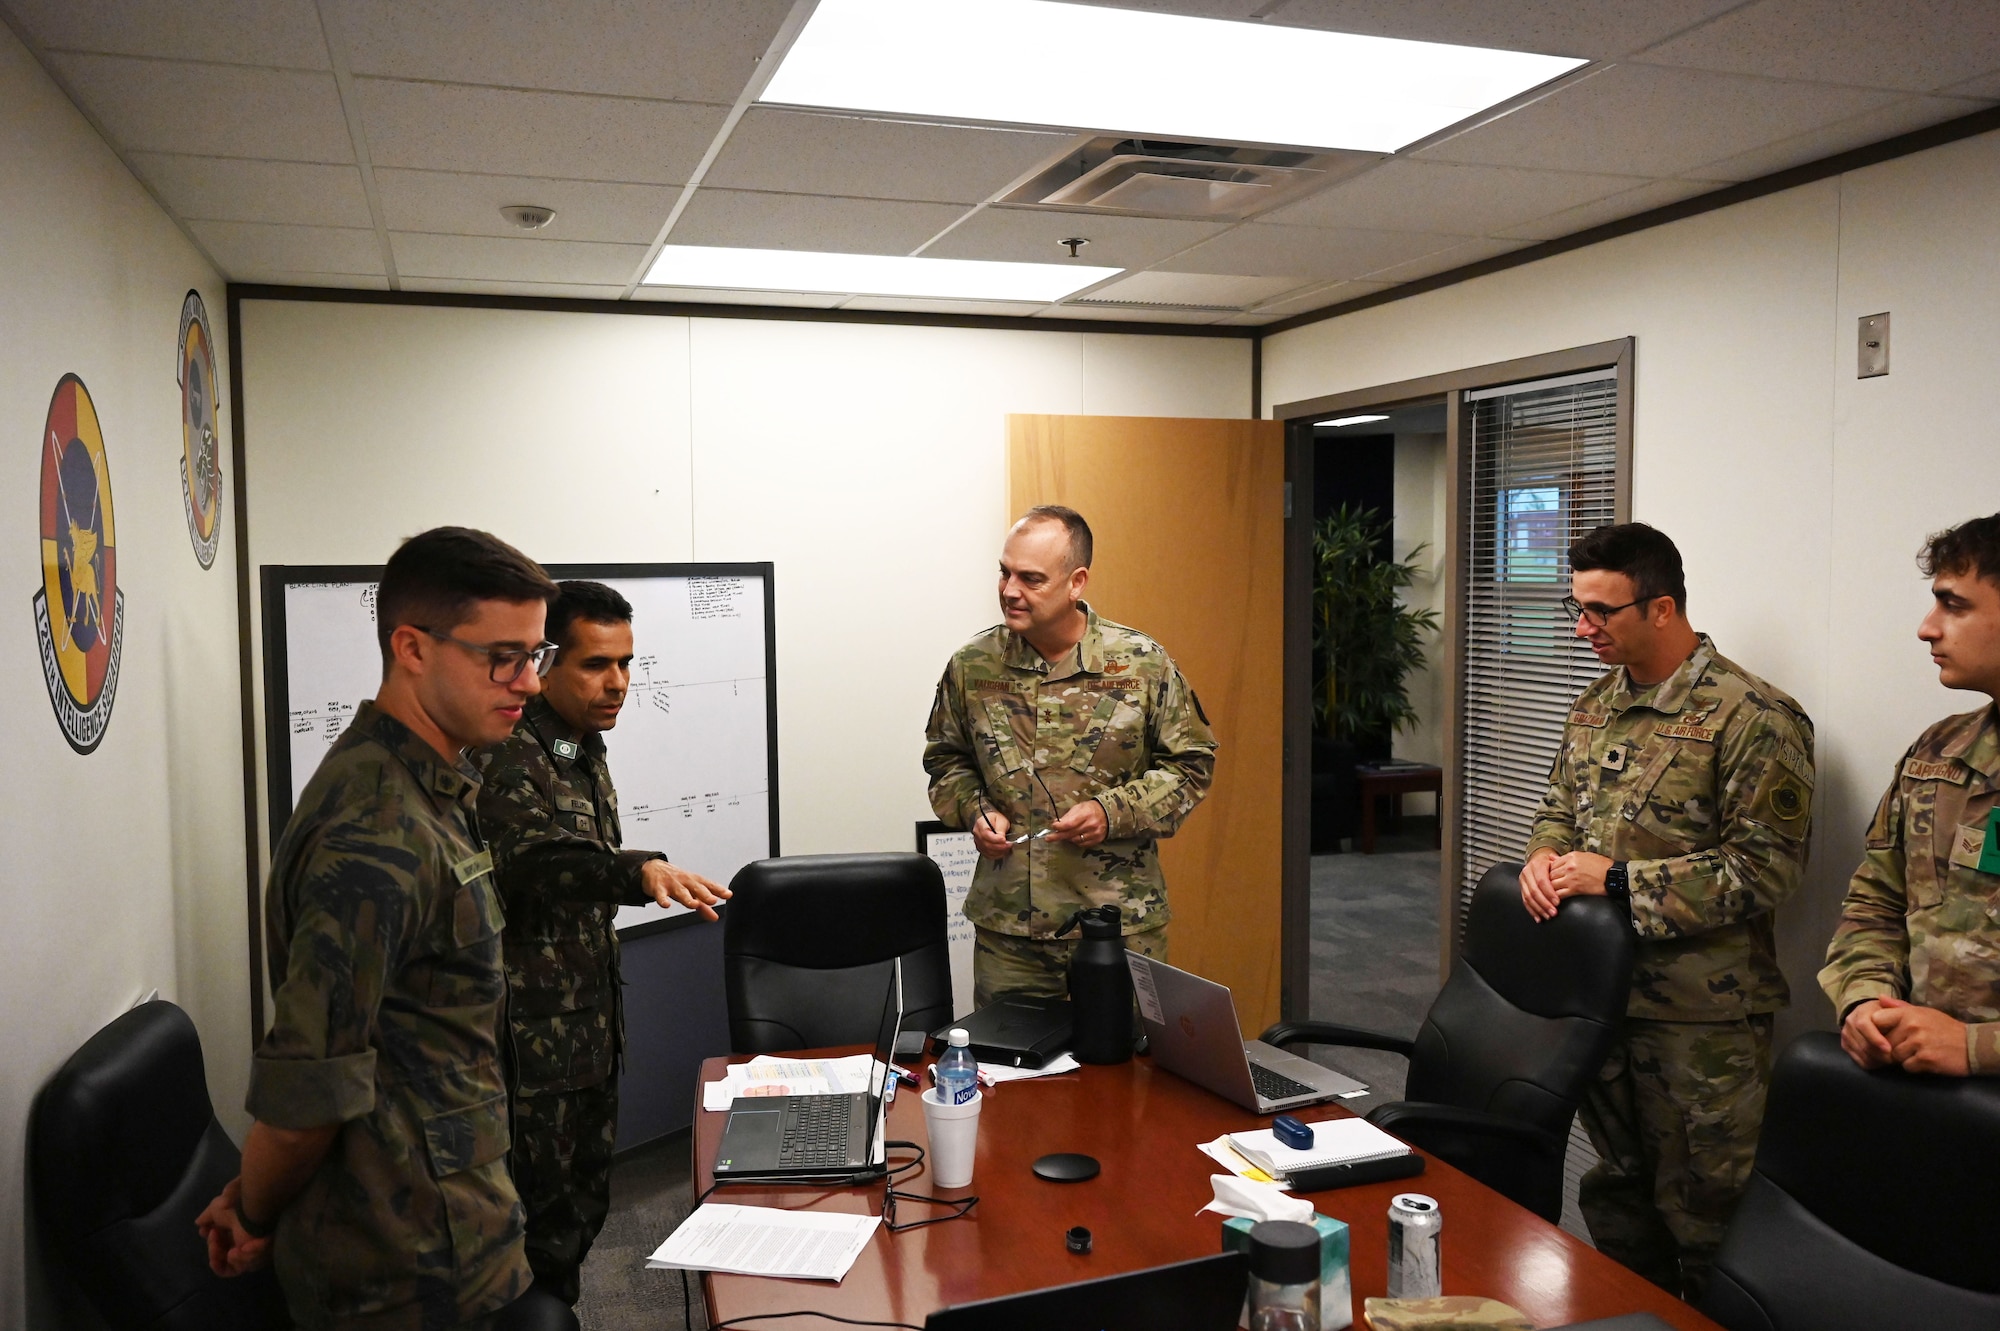 Major General Vaughan introduces himself to members participating in the the Vulcan Guard exercise.